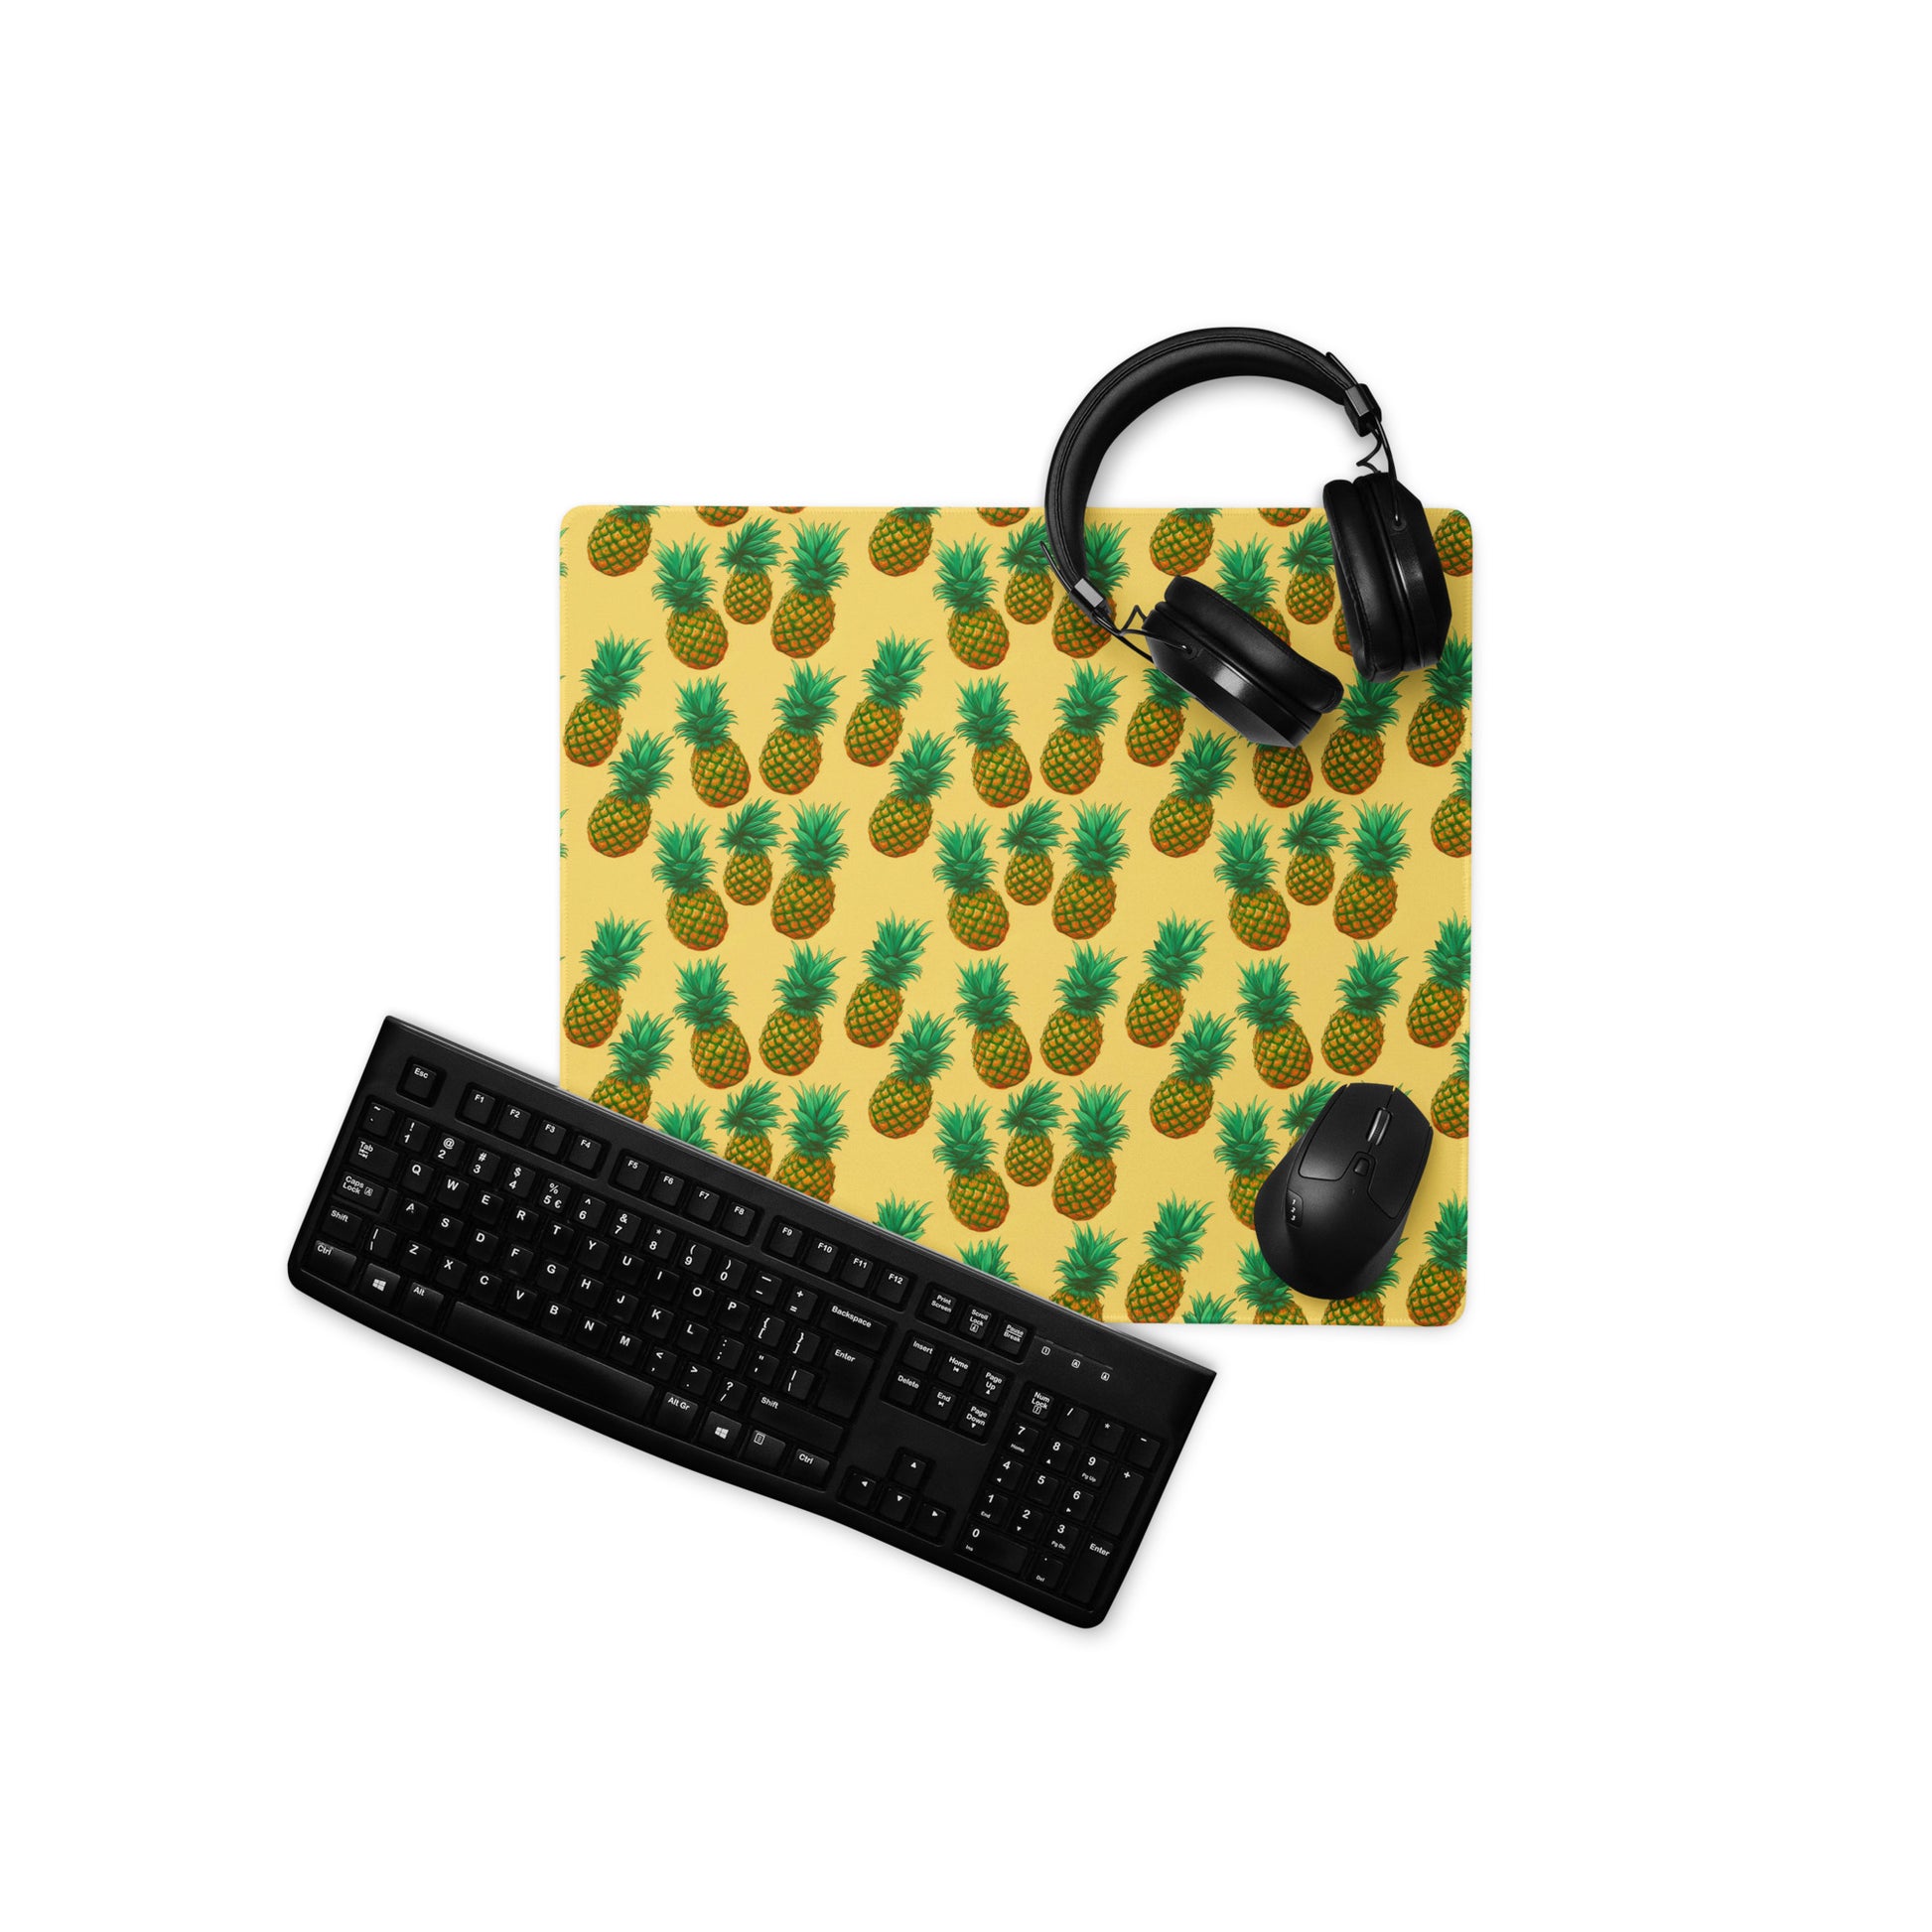 A 18" x 16" desk pad with pineapples all over it displayed with a keyboard, headphones and a mouse. Yellow in color.